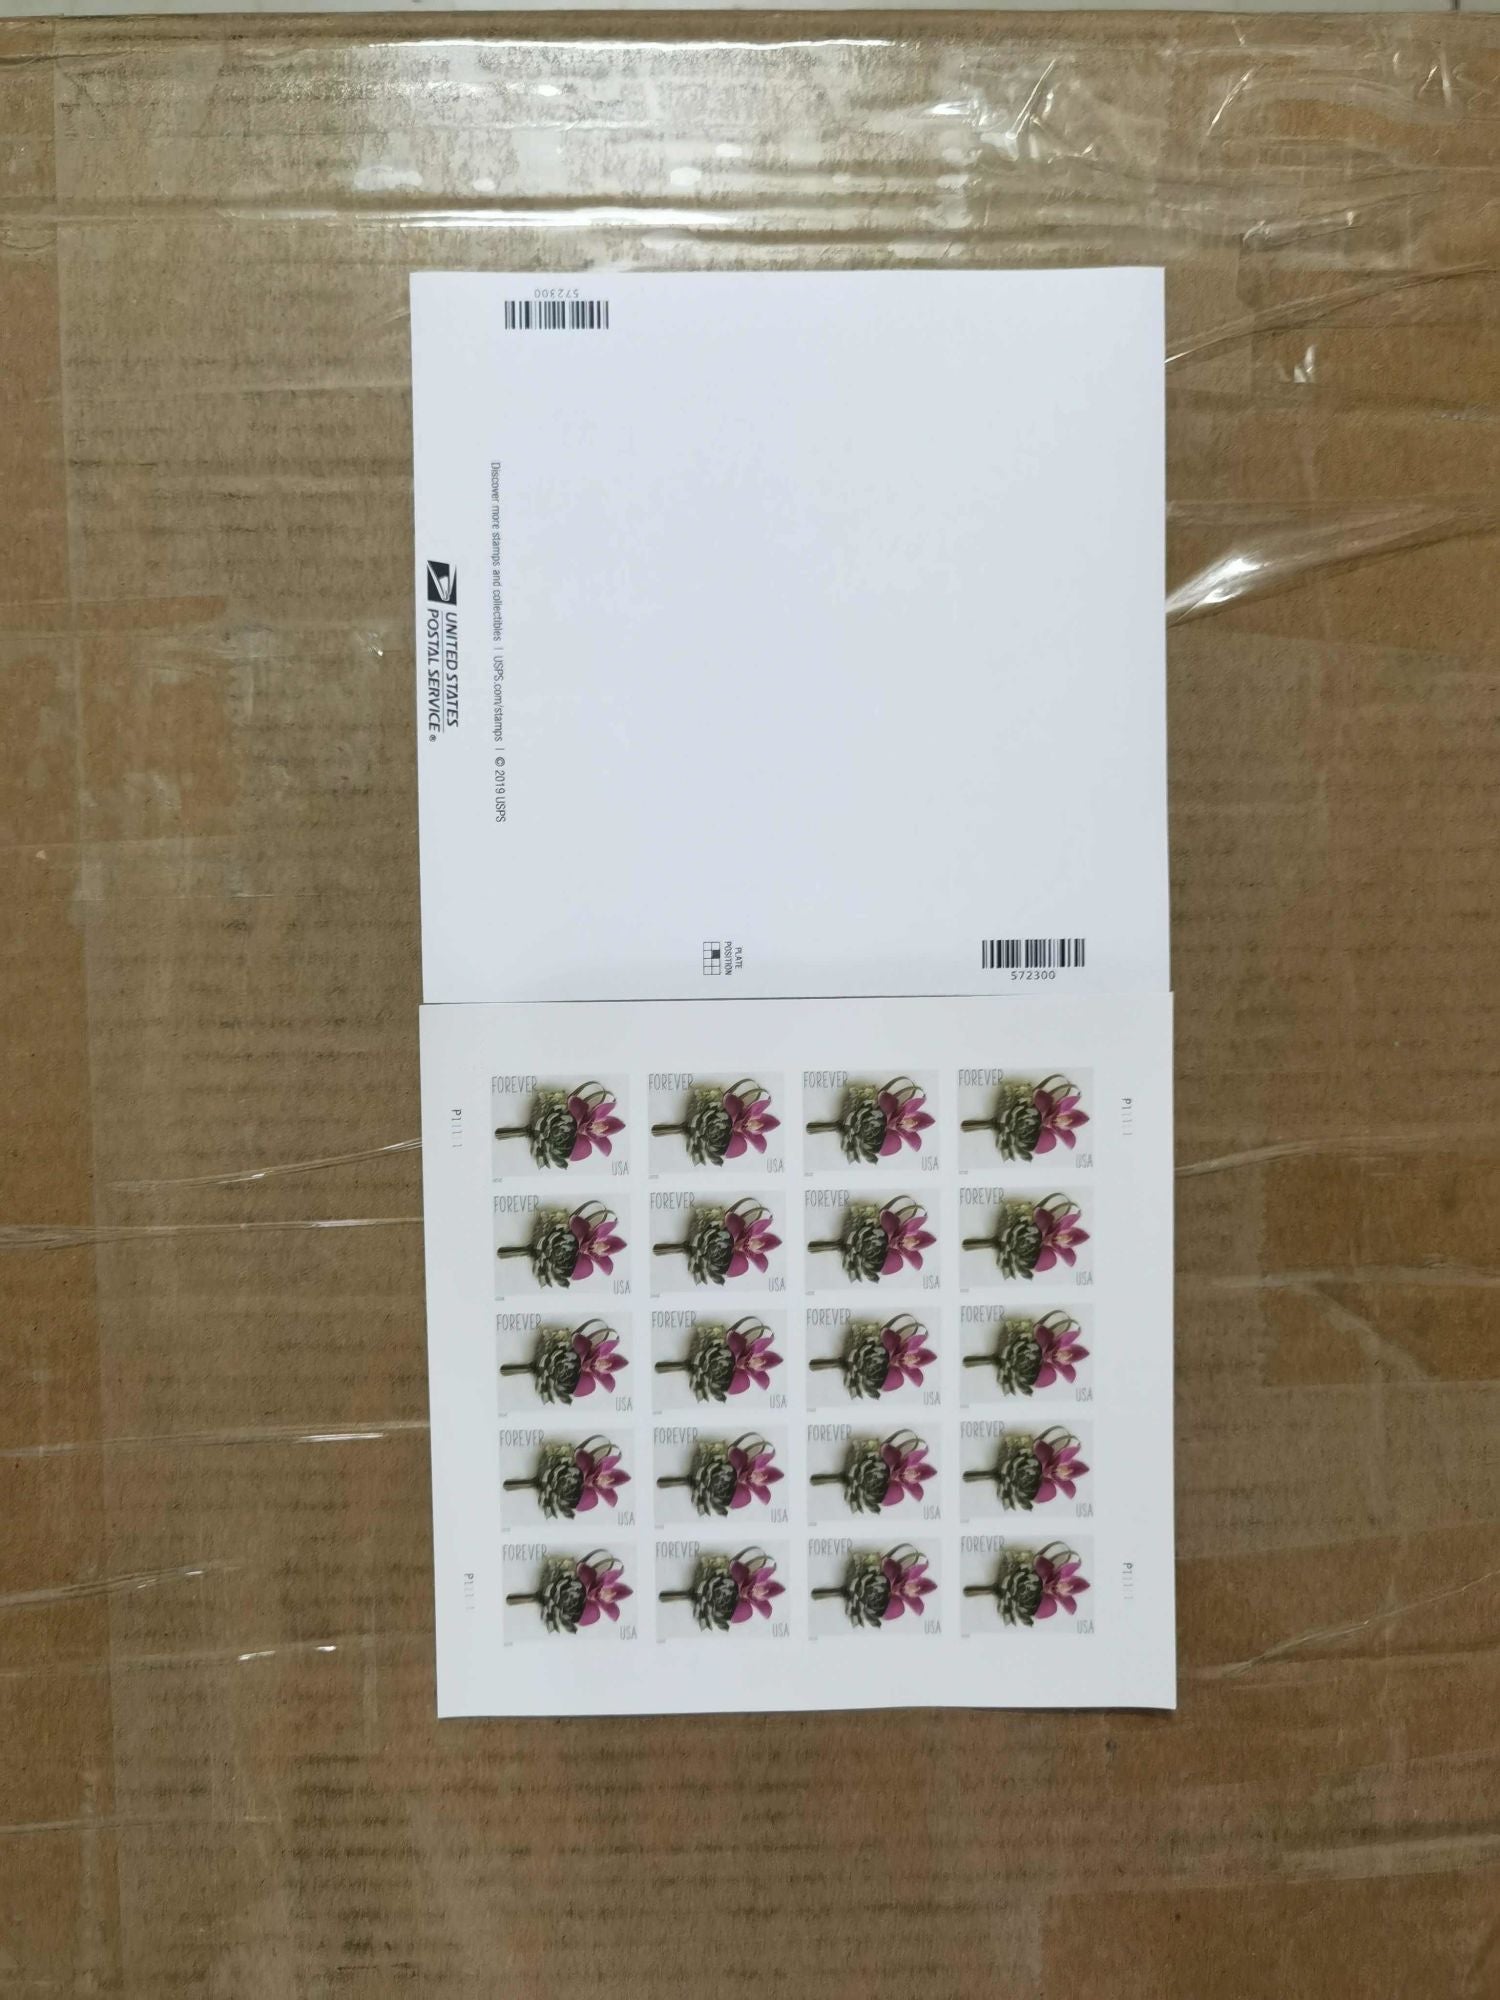 A sheet of First-Class Rate 2020 U.S. STAMPS featuring a contemporary boutonniere design, placed on a cardboard surface.